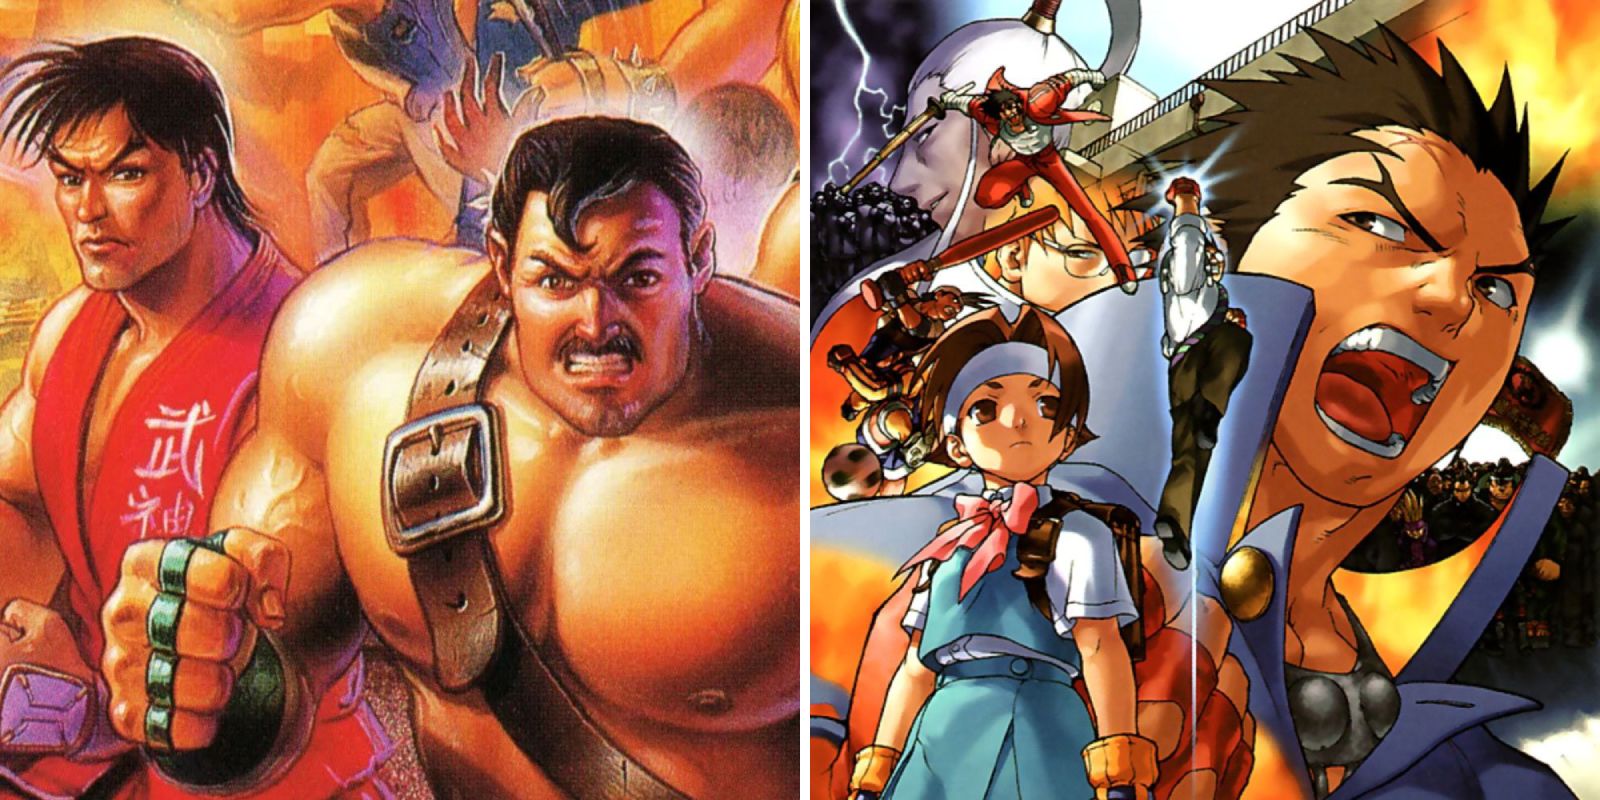 Split image with Guy and Mike Haggar on the cover of Final Fight-3 as well as art featuring characters from Rival Schools United by Fate including Street Fighter's Sakura and Batsu